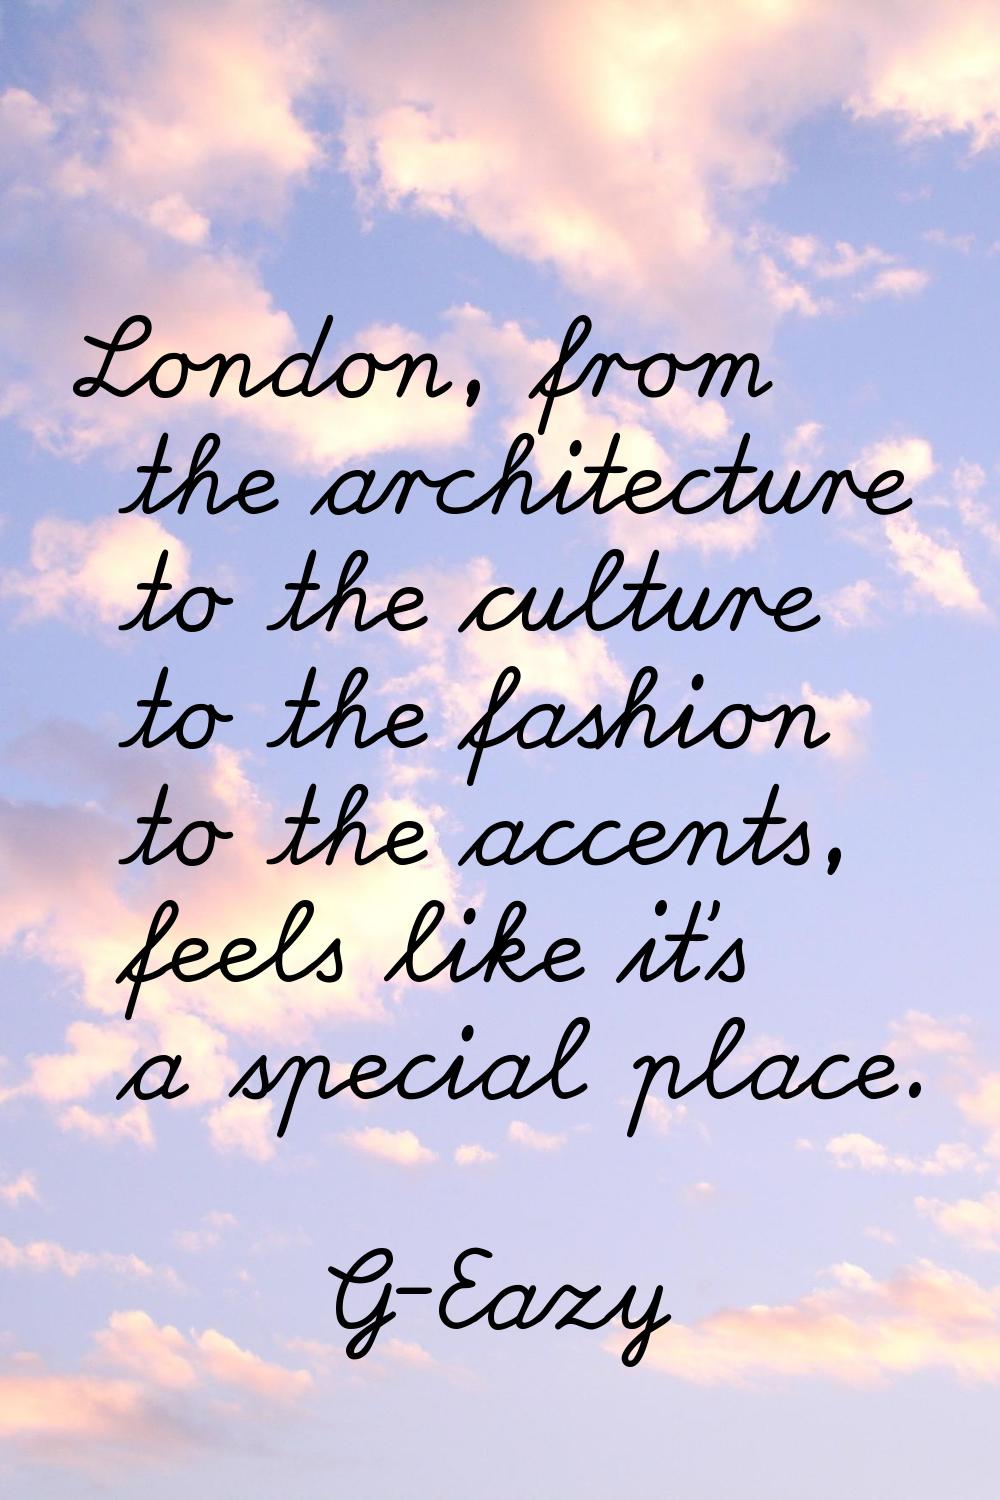 London, from the architecture to the culture to the fashion to the accents, feels like it's a speci